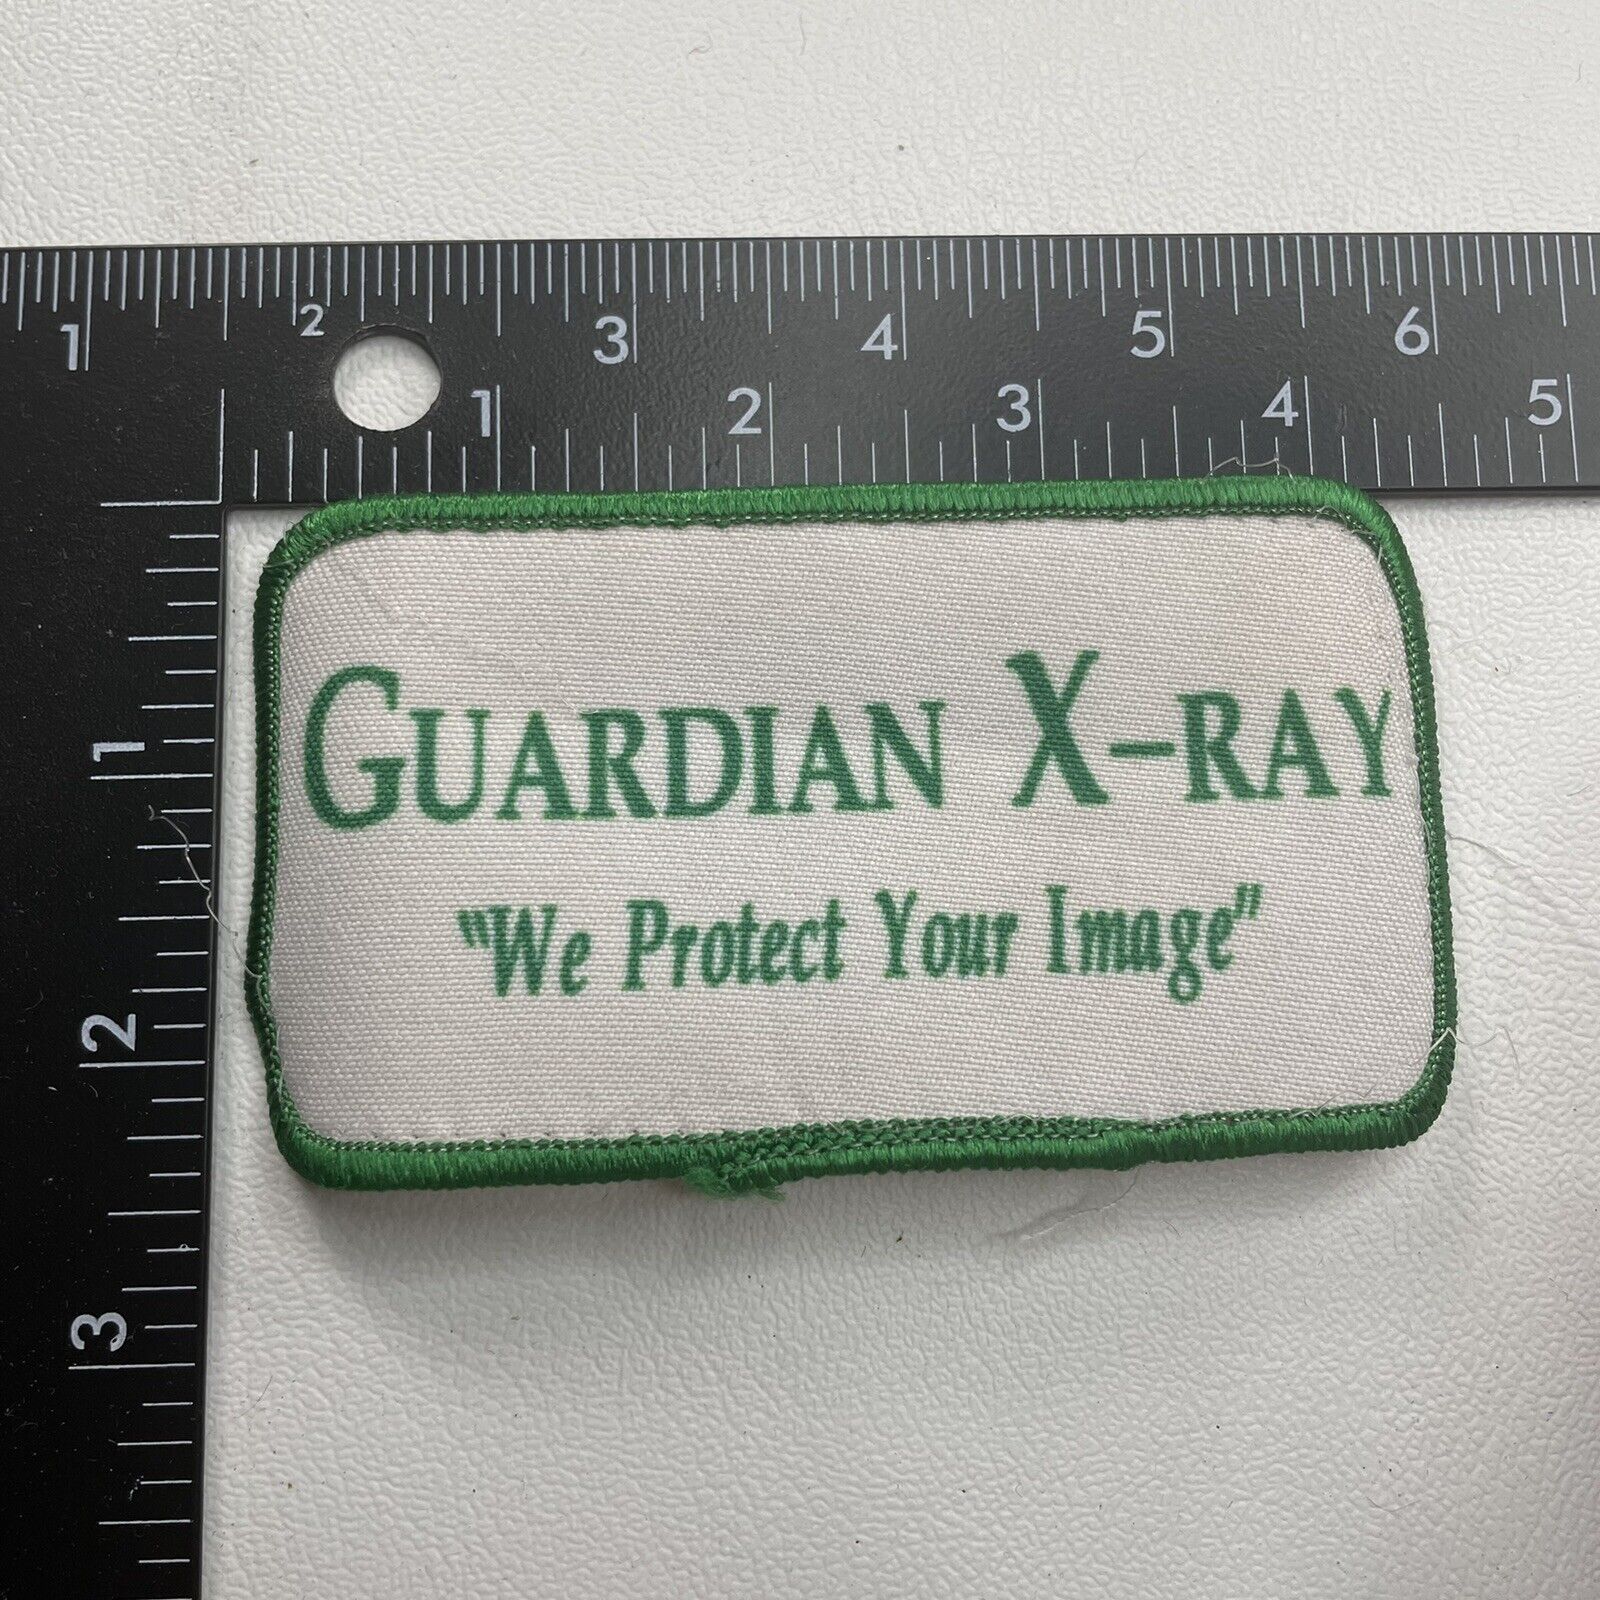 Used / Recycled GUARDIAN X-RAY WE PROTECT YOUR IMAGE Advertising Patch 12V2